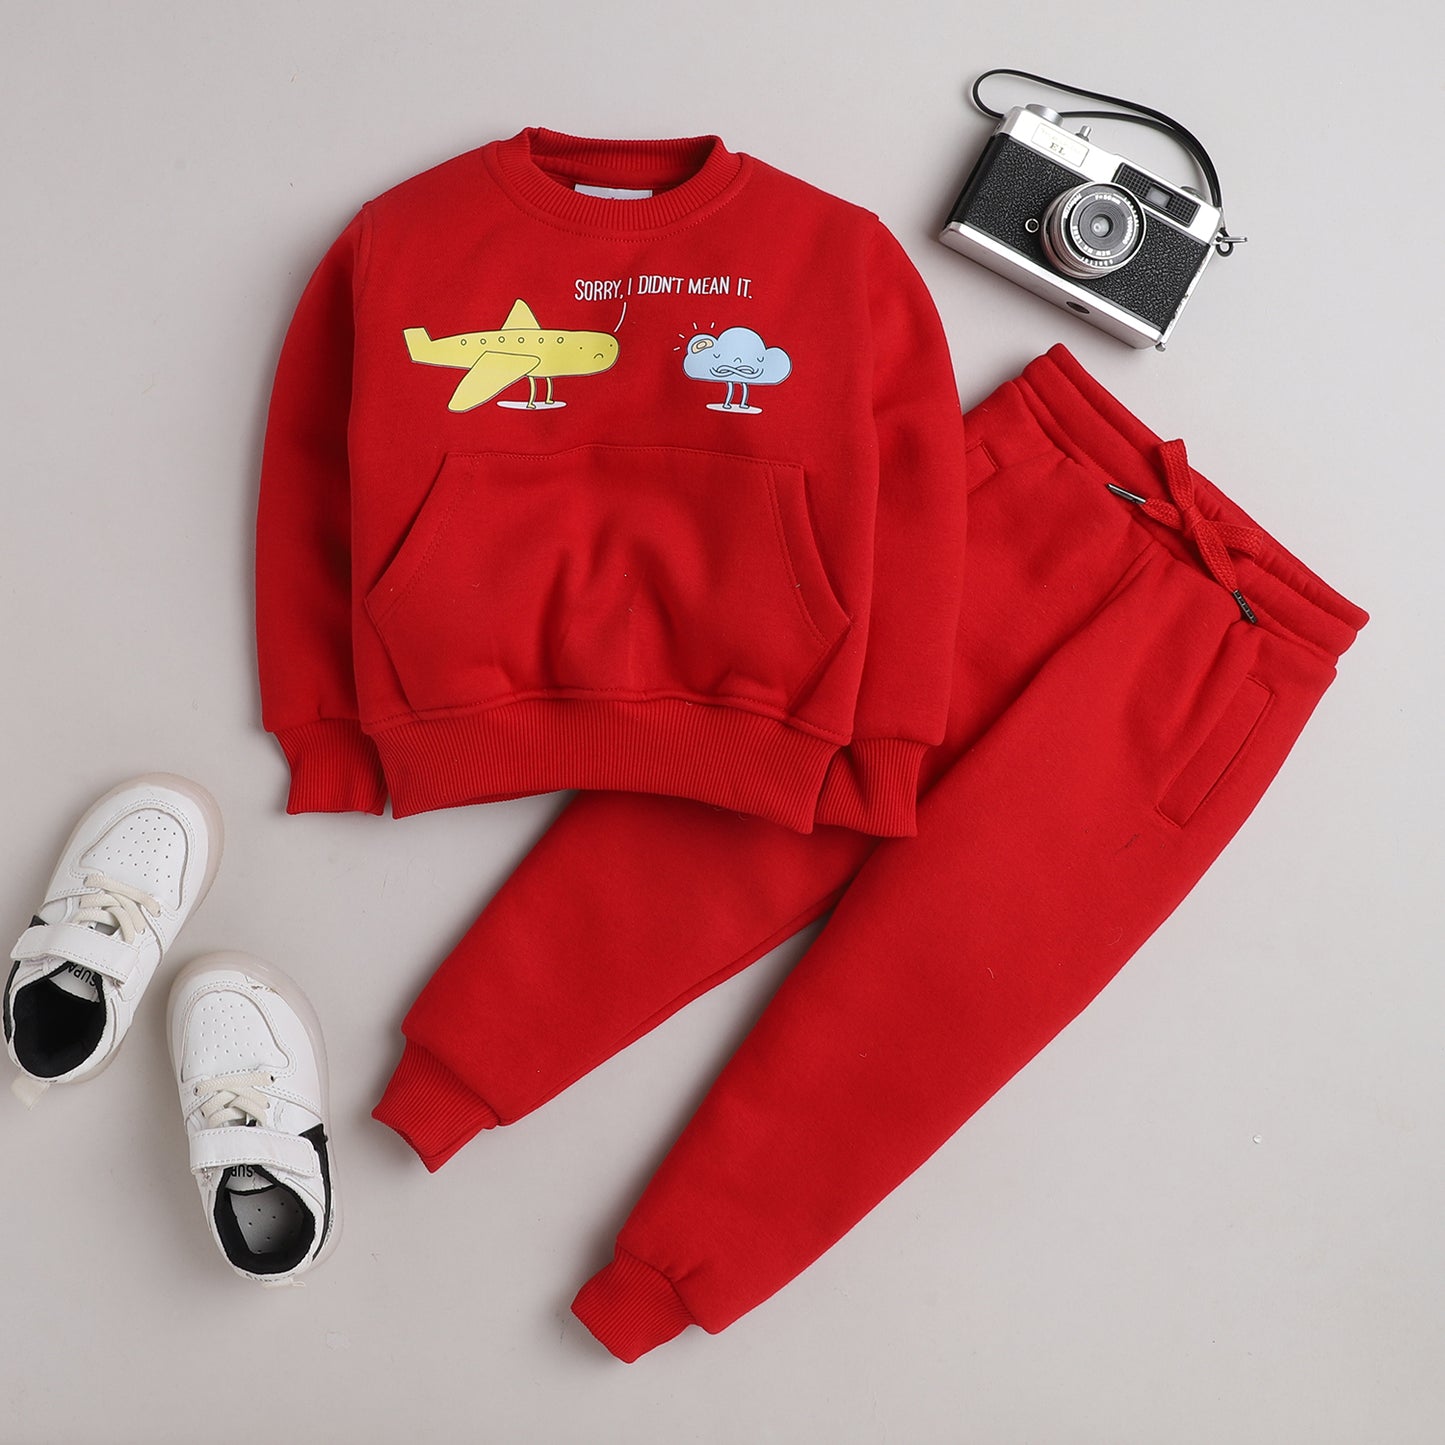 Knitting Doodles Fleece Kid's Red Round Neck Cloud and Aeroplane Print Jogger Set-Red